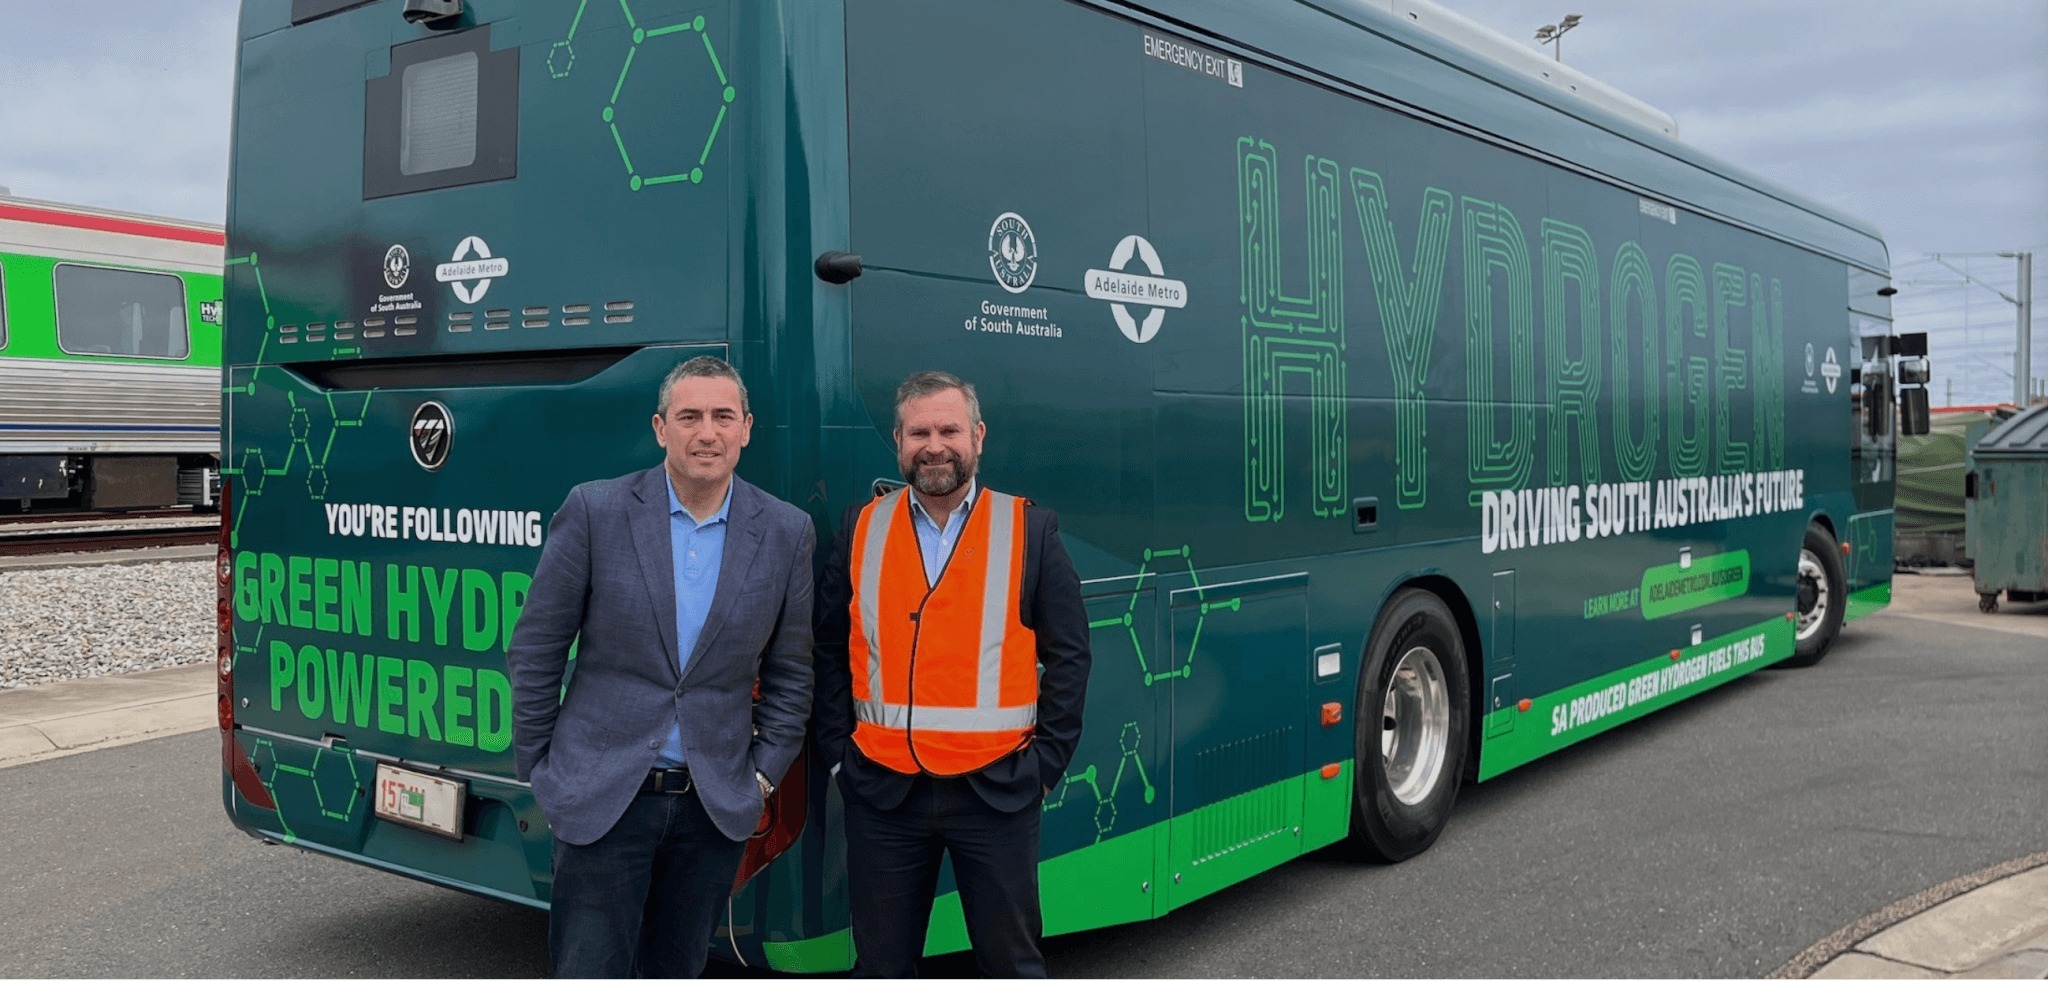 Up to 80,000 Hydrogen bus Journeys by the end of 2023 in Australia